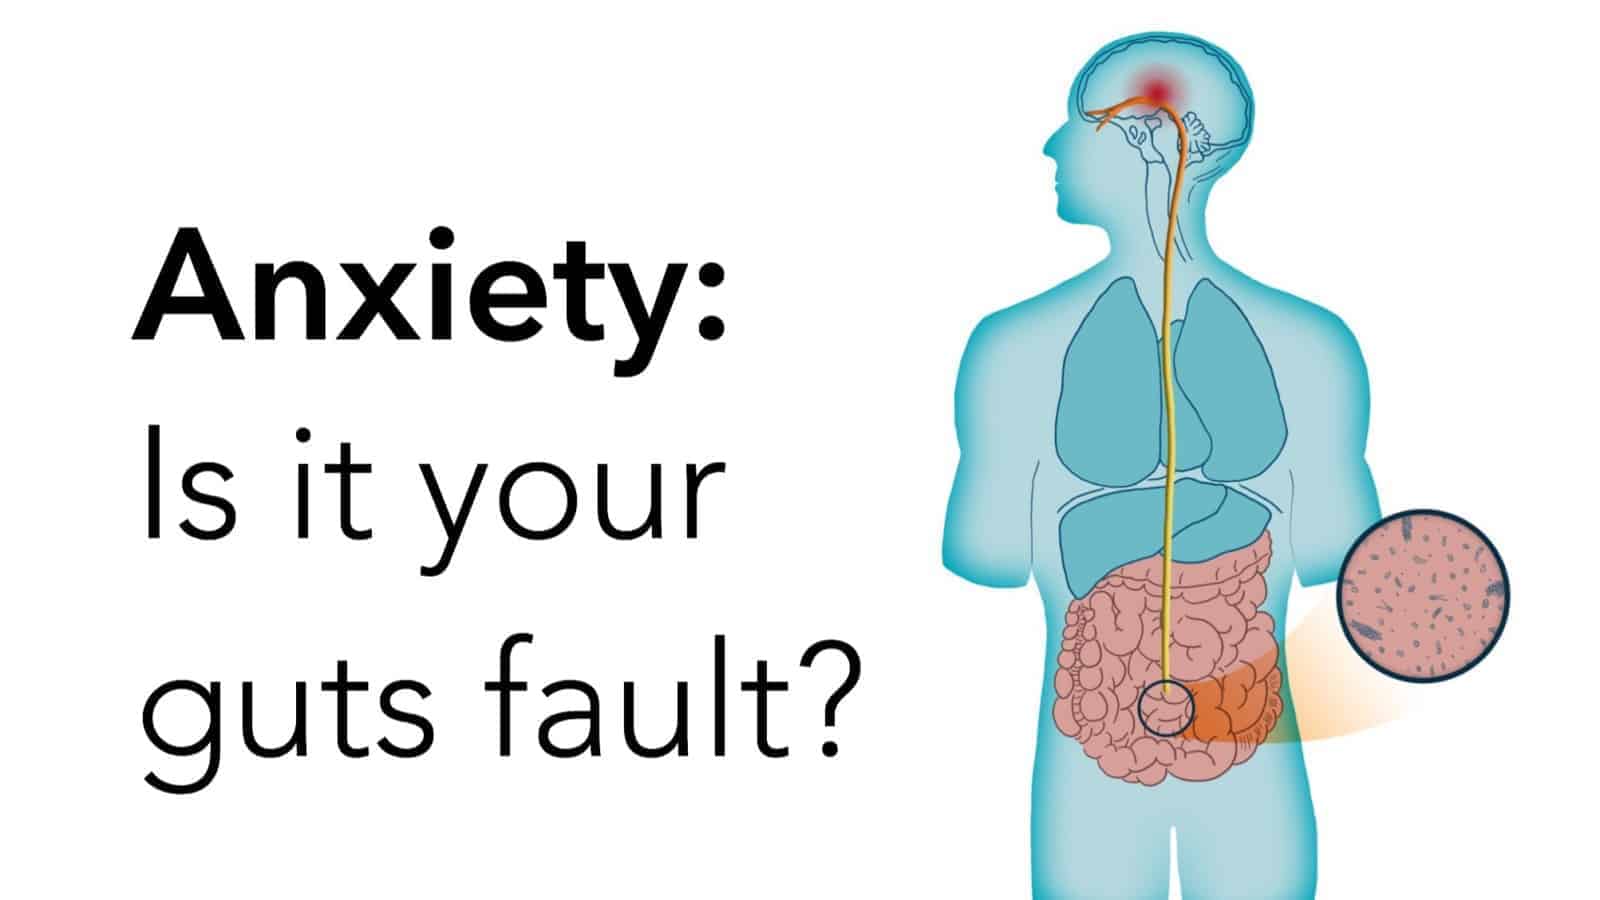 Researchers Explain How Your Gut Bacteria Causes Anxiety, According to Science